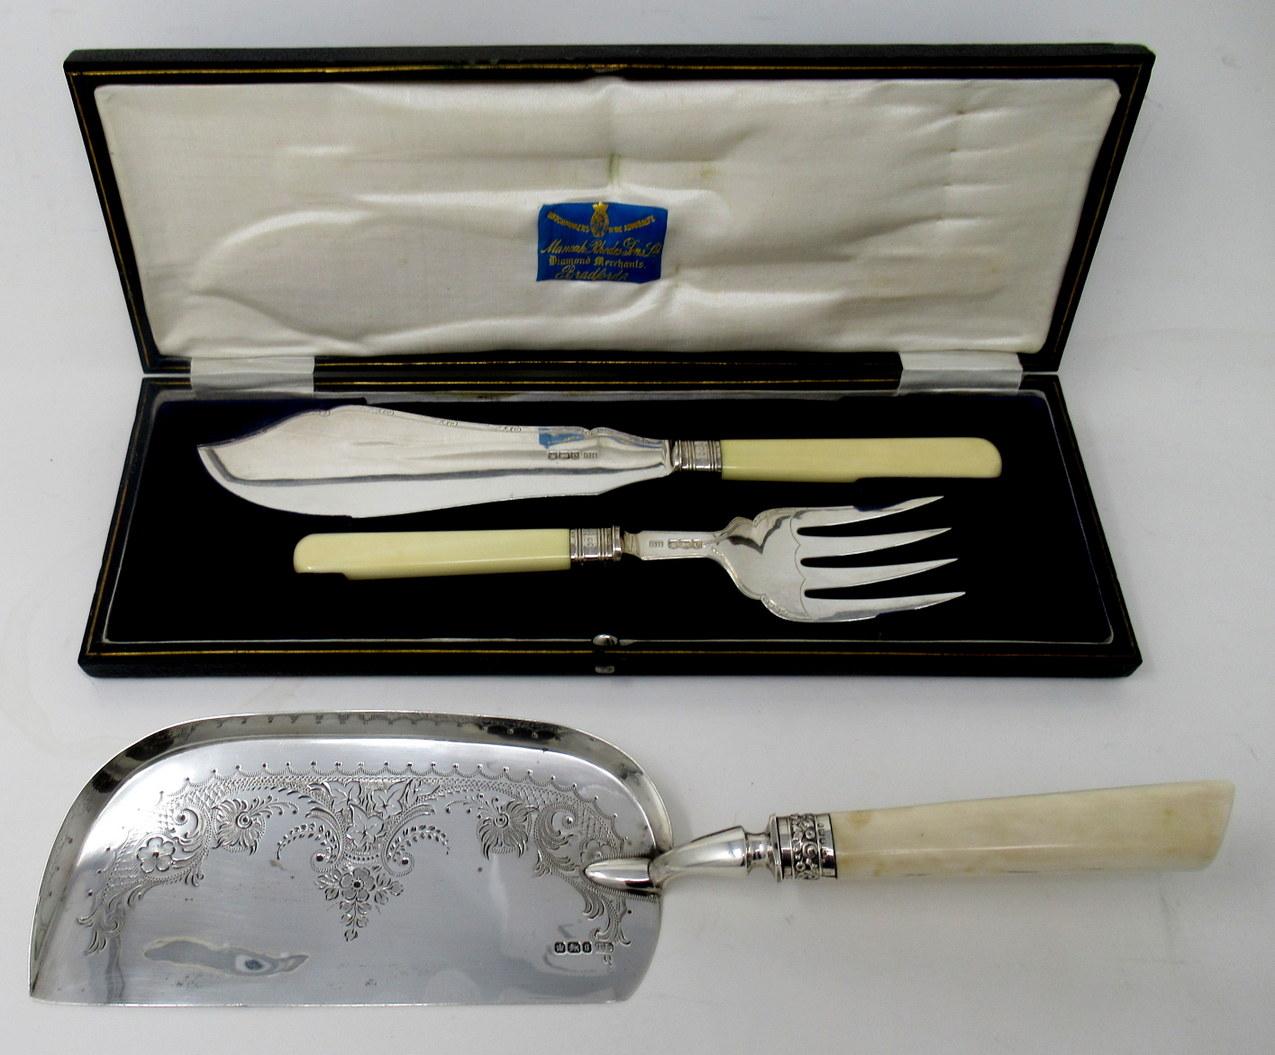 Superb Pair of English Sterling Silver Heavy Gauge Fish Servers of outstanding quality, with exquisite Hand Carved Chinese Handles. Complete with its original silk lined leather case. 

The Fish Slice blade of incurved form exquisitely chased